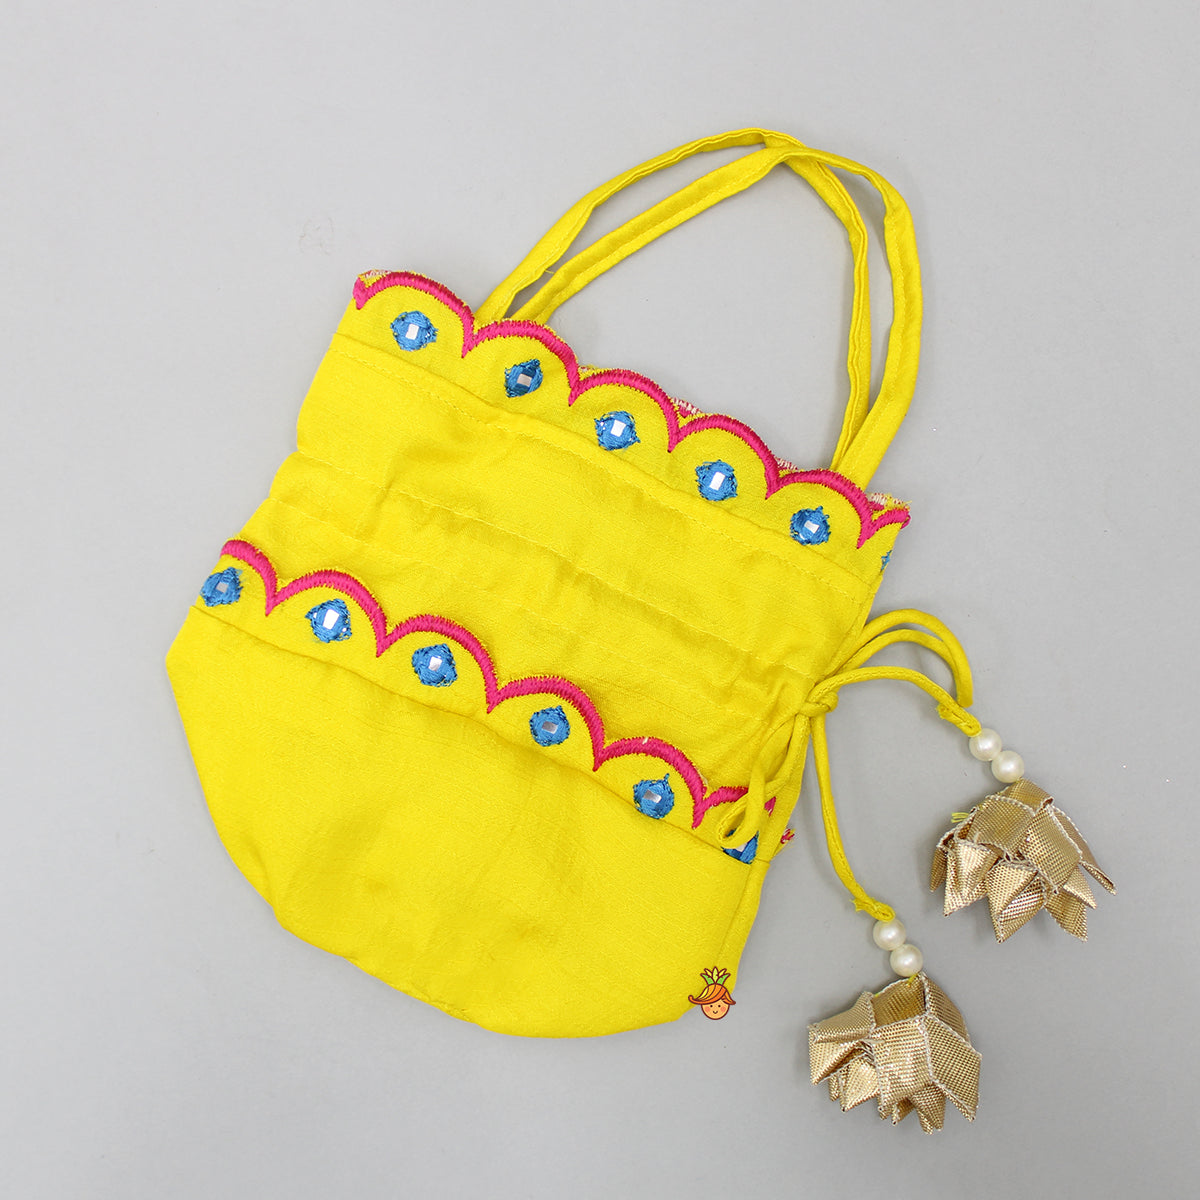 Buy Traditional India Handmade Gota Patti Work Yellow Potli Bag Golden Lace  Embroidered Drawstring Wristlets Pouch Handbag Bridal Wedding Gifts Online  in India - Etsy